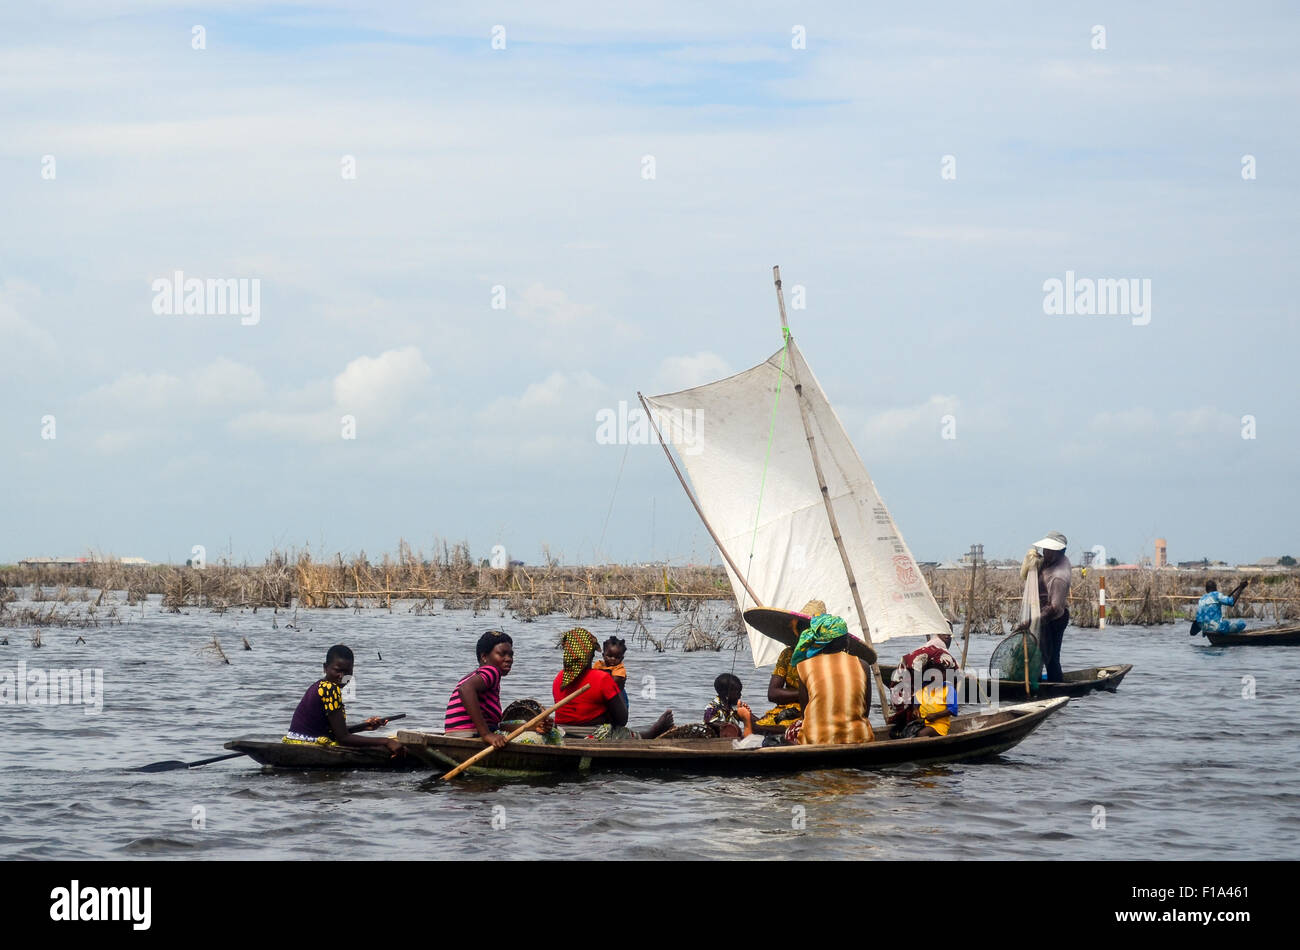 African people navigating in Ganvié, the 'Venice of Africa', village of stilt houses on a lake near Cotonou in Benin Stock Photo